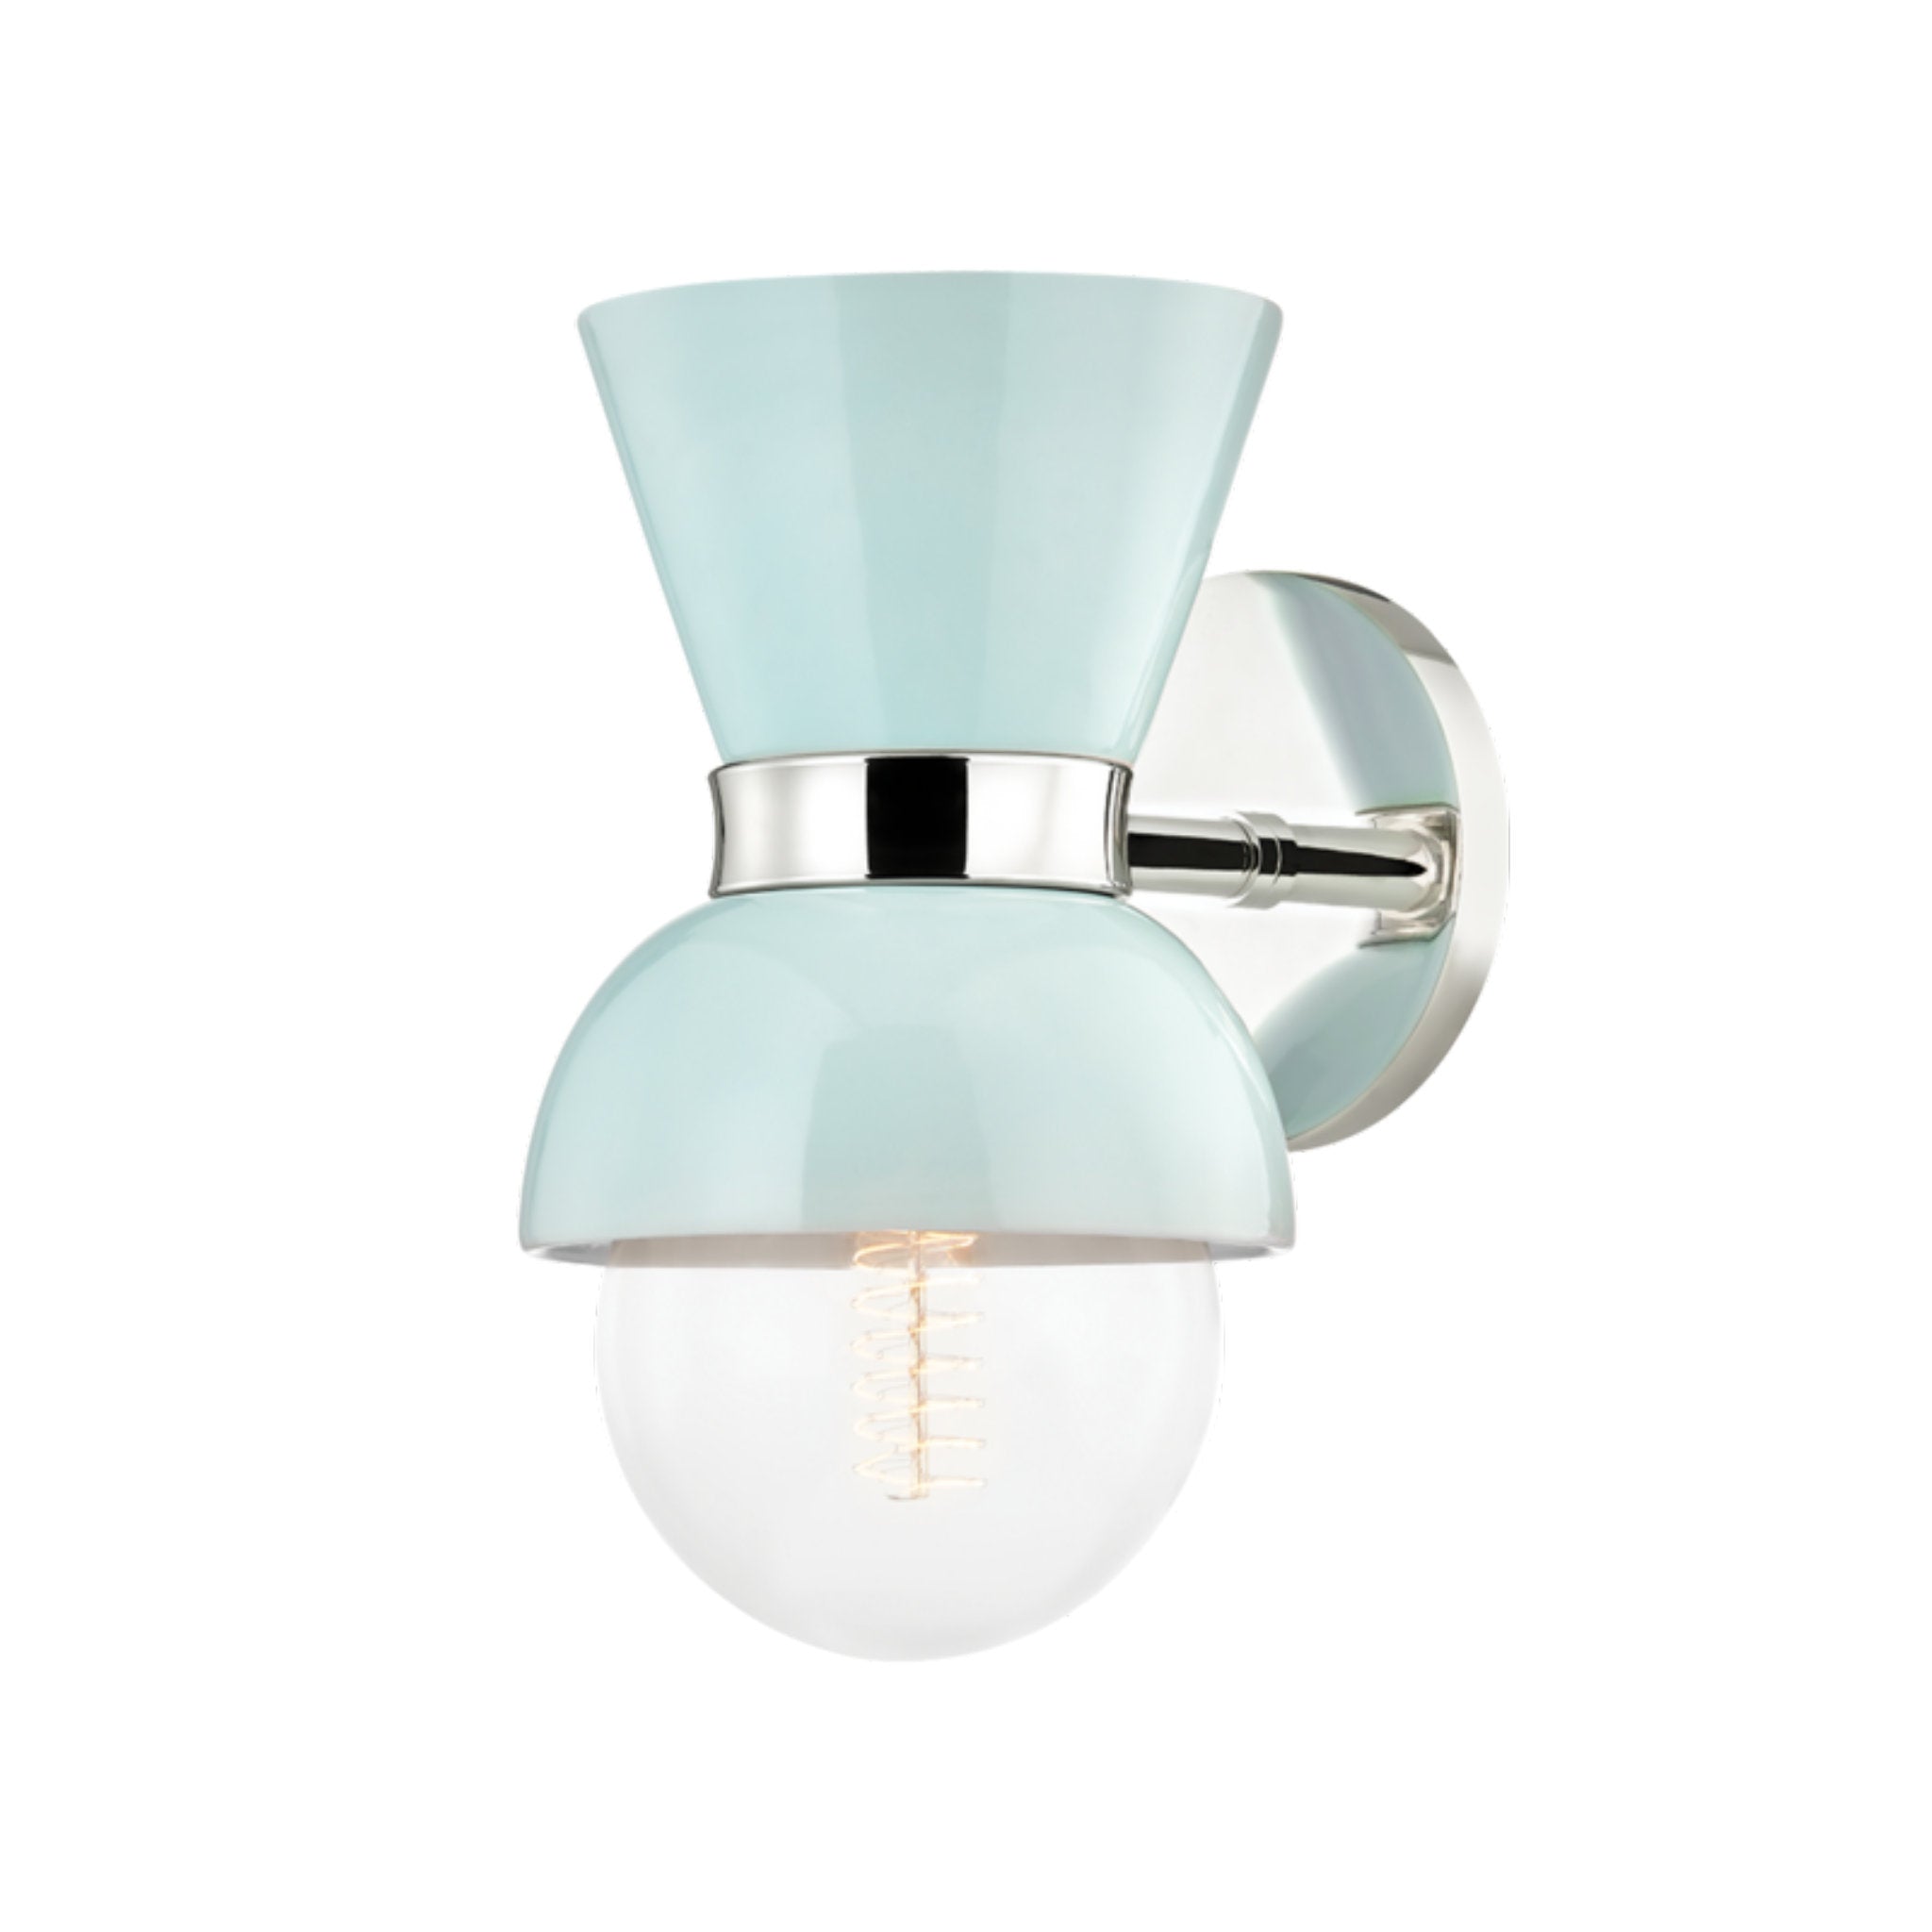 Gillian 1 Light Wall Sconce in Polished Nickel/Ceramic Gloss Robins Egg Blue